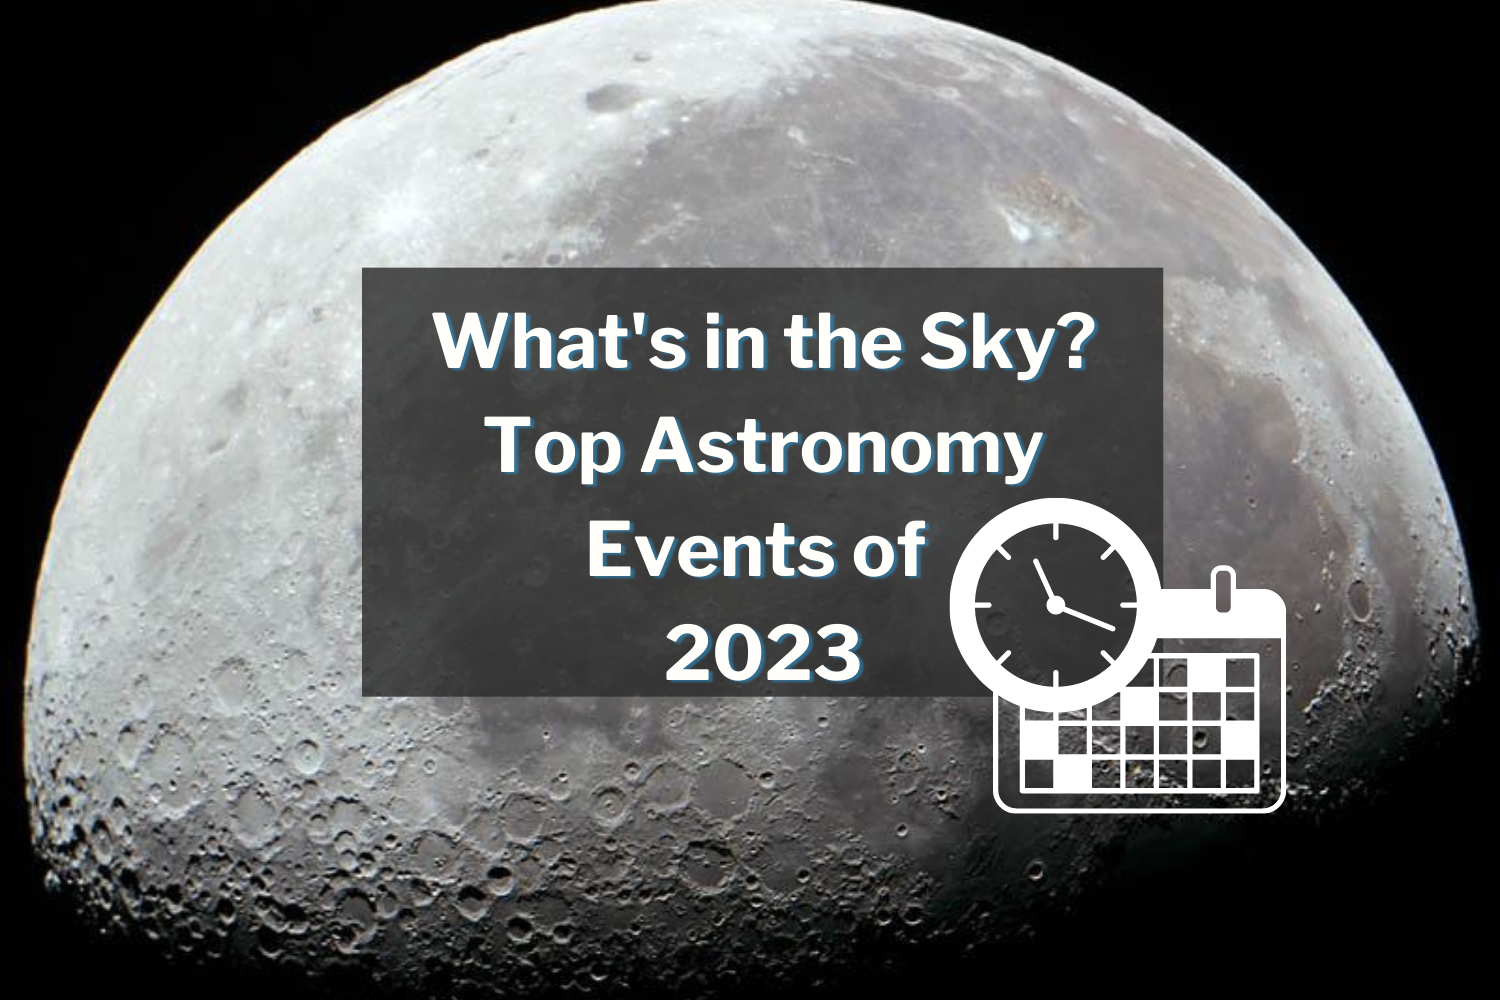 Astronomy Events to Look Out For in 2023